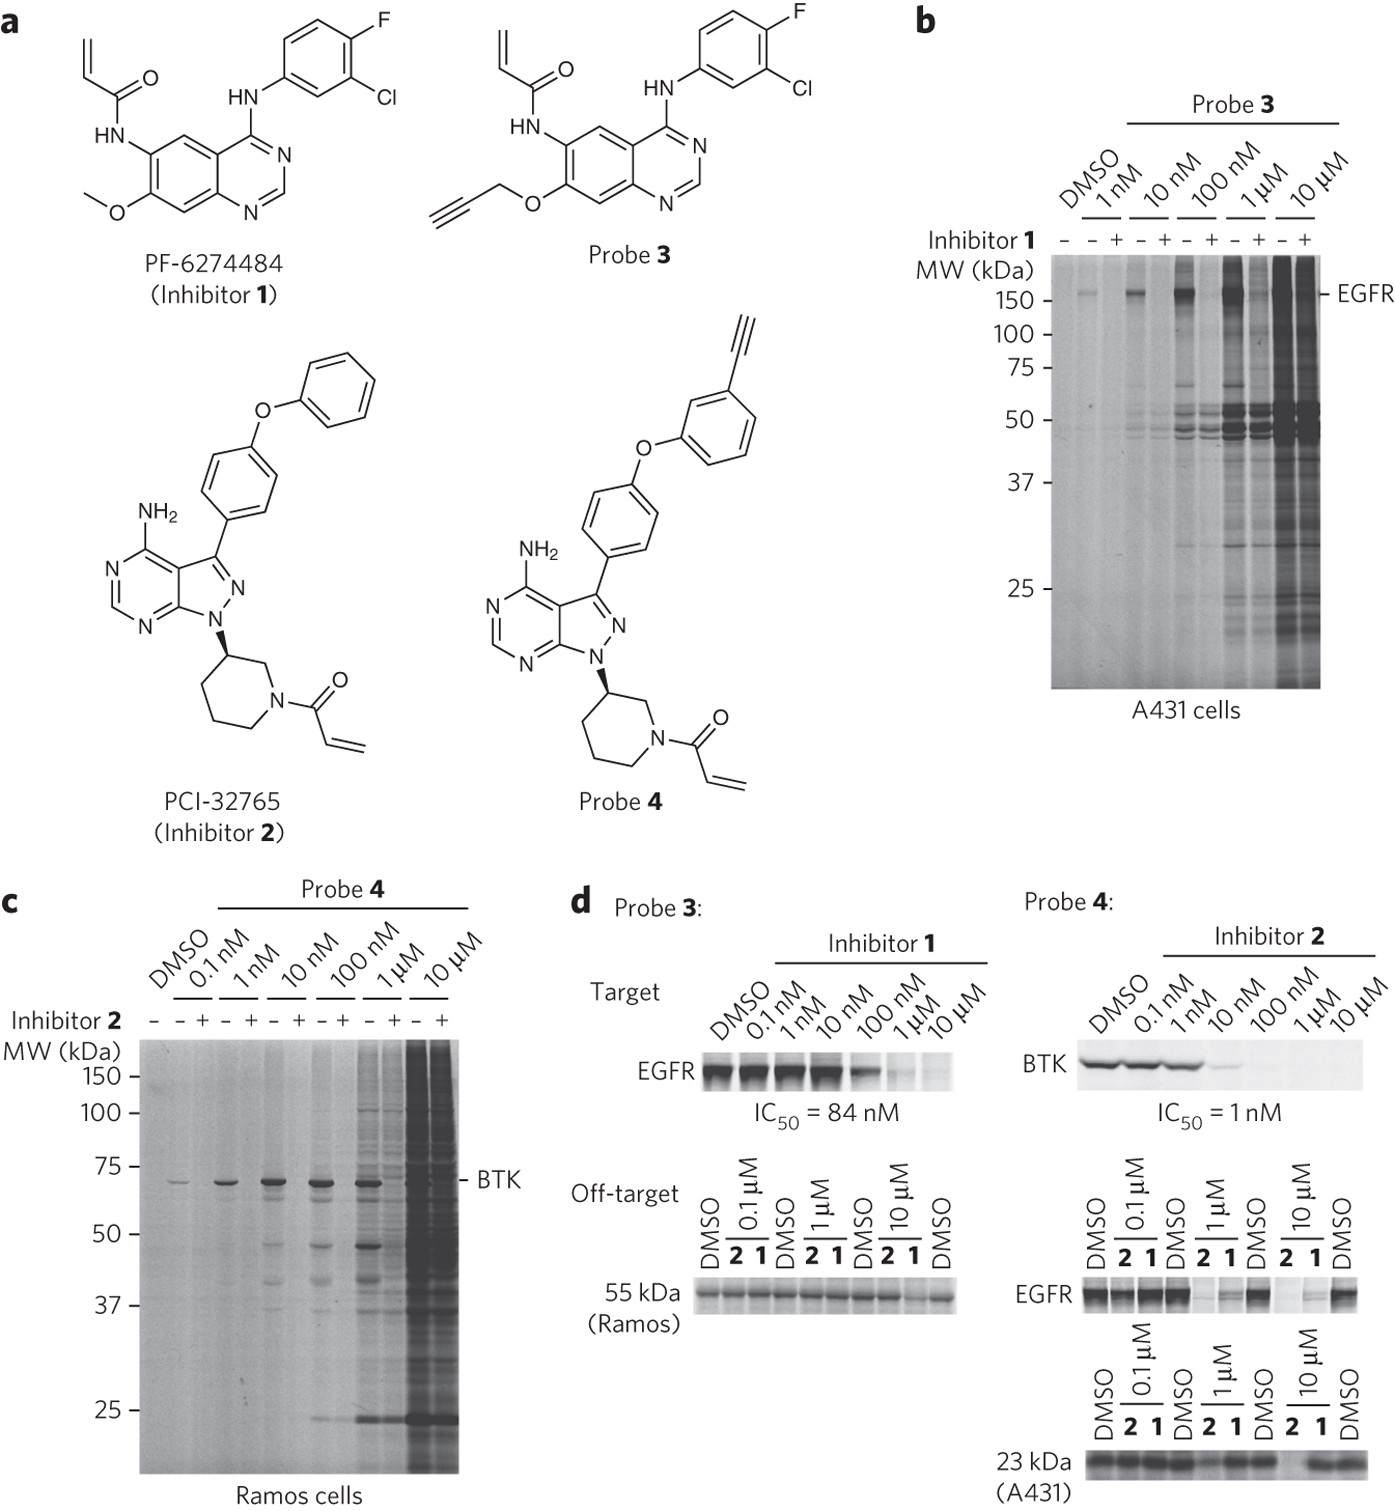 Relative Selectivity of Covalent Inhibitors Requires Assessment of  Inactivation Kinetics and Cellular Occupancy: A Case Study of Ibrutinib and  Acalabrutinib